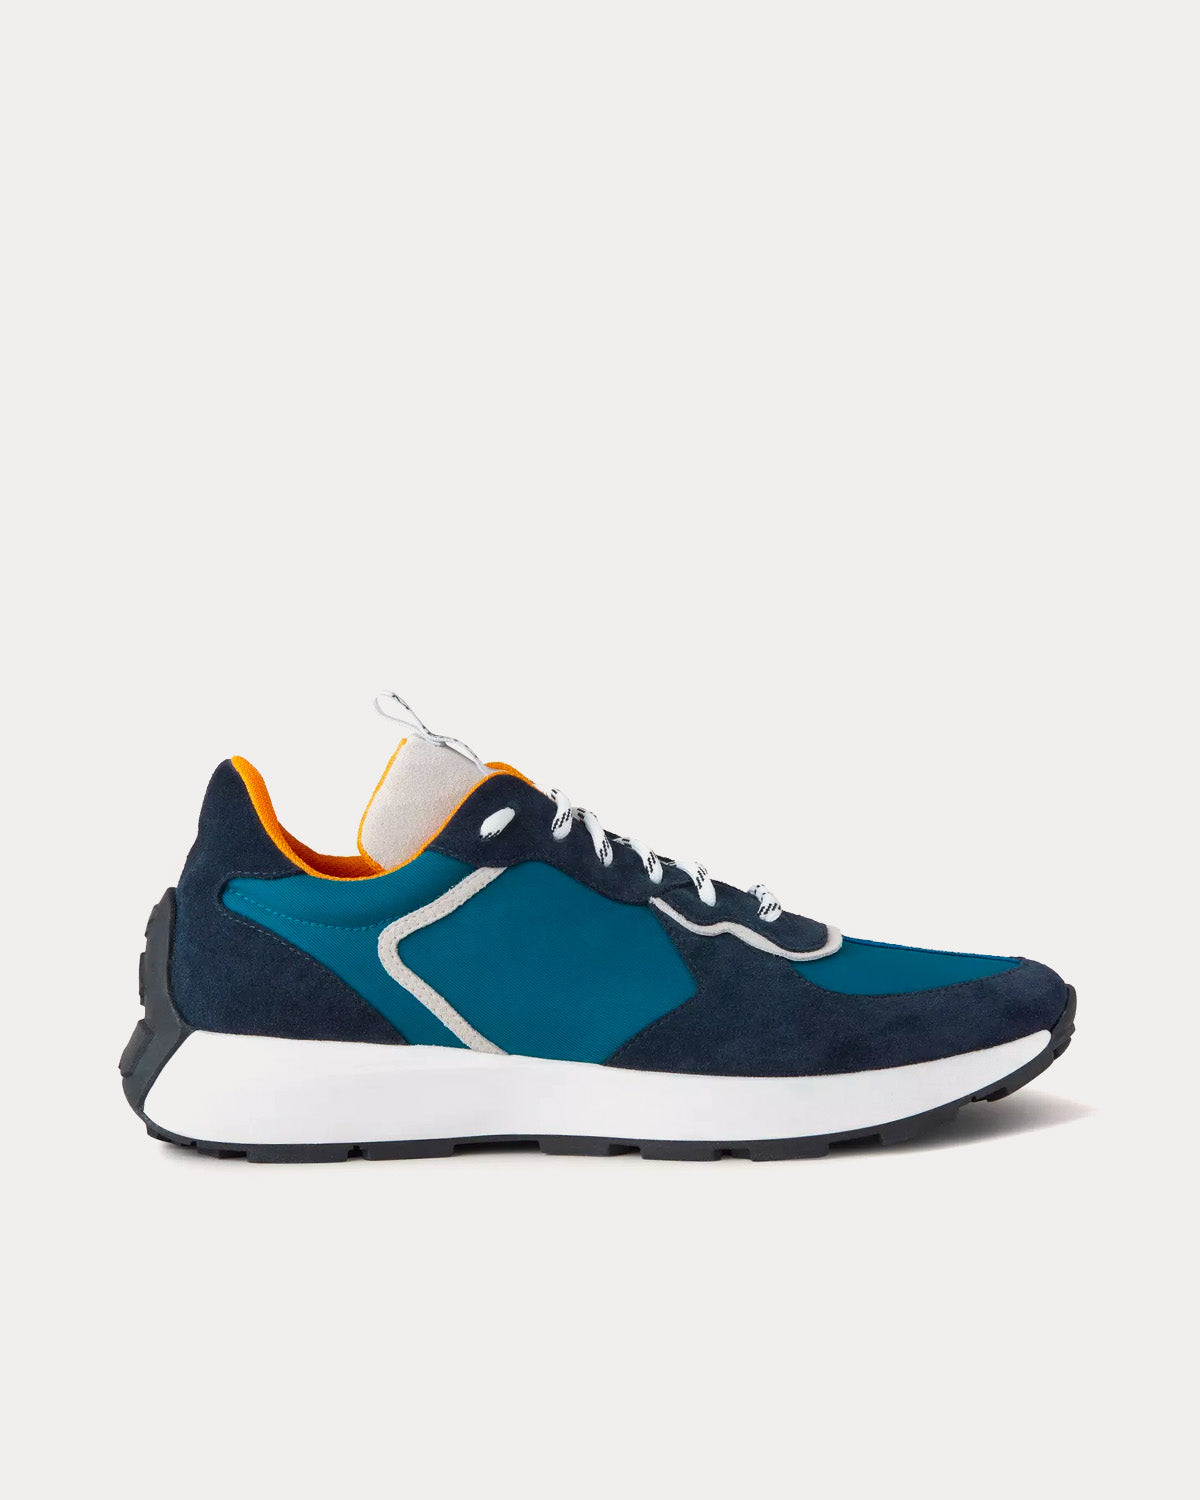 Mulberry - Runner Mixed Material Sapphire / Portobello Blue / Double Yellow Low Top Sneakers